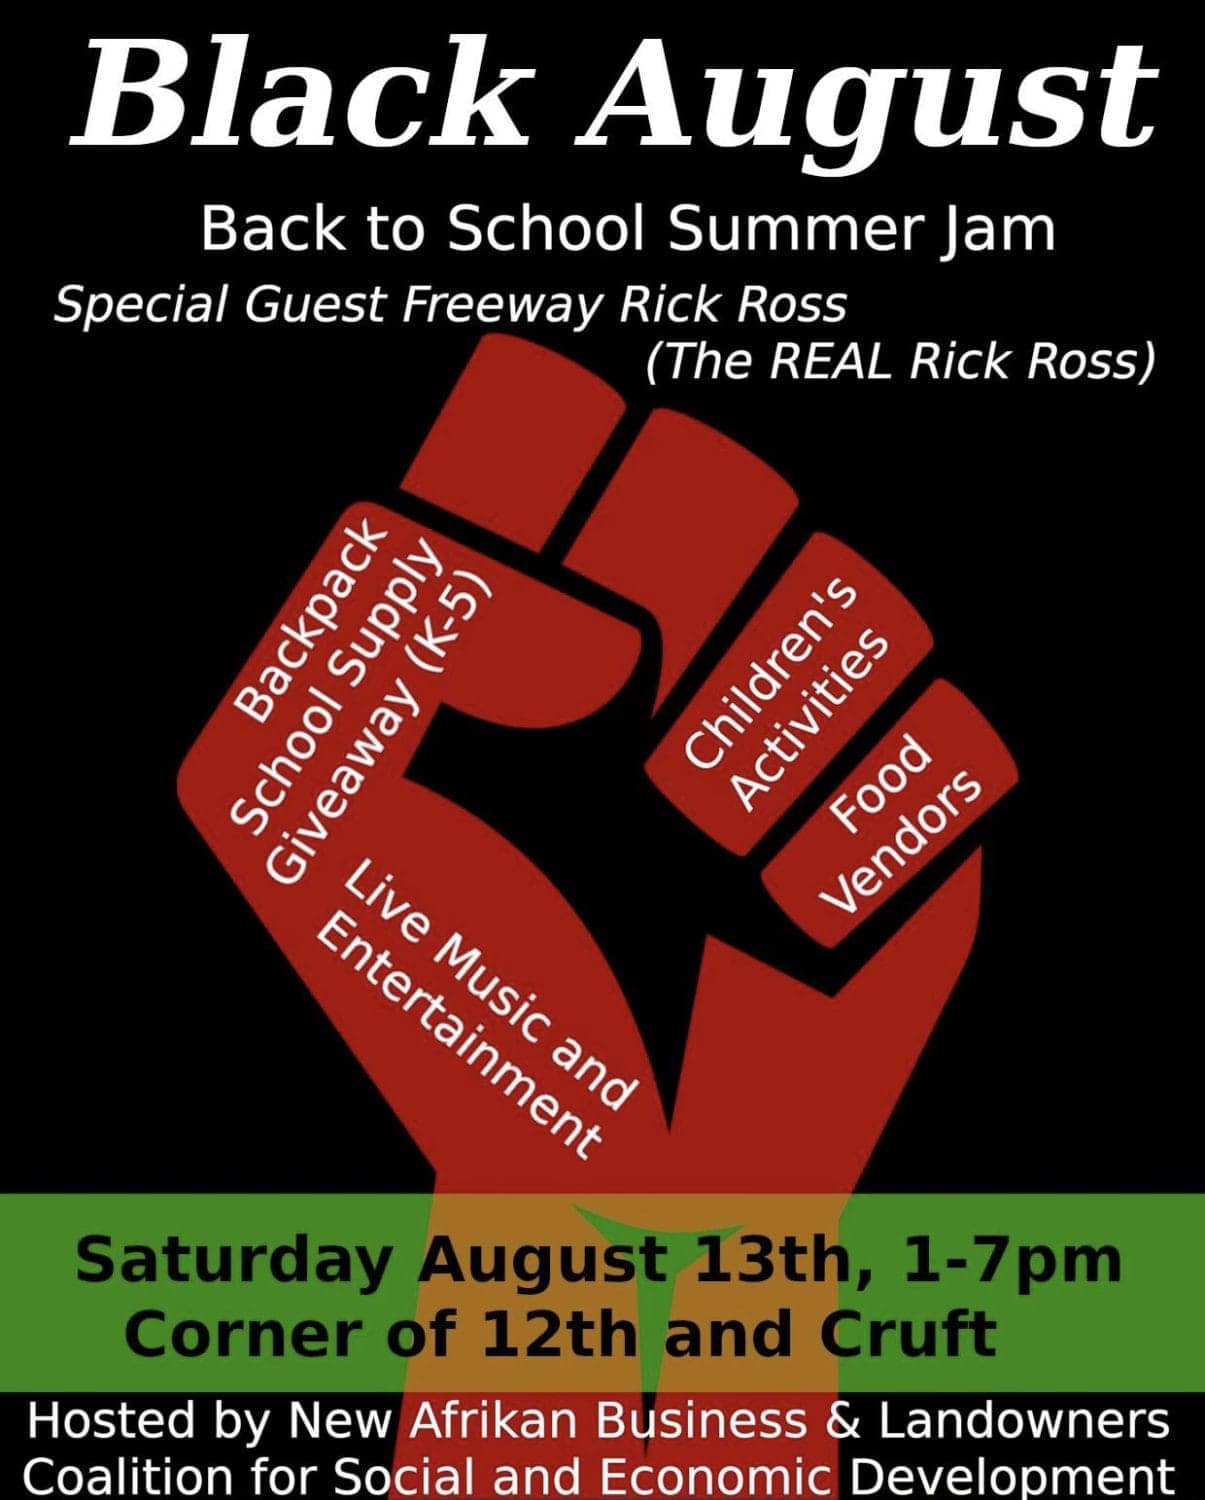 Black-August-Back-to-School-Summer-Jam, T.H.U.G L.I.F.E: From gangster to growth, Abolition Now! 